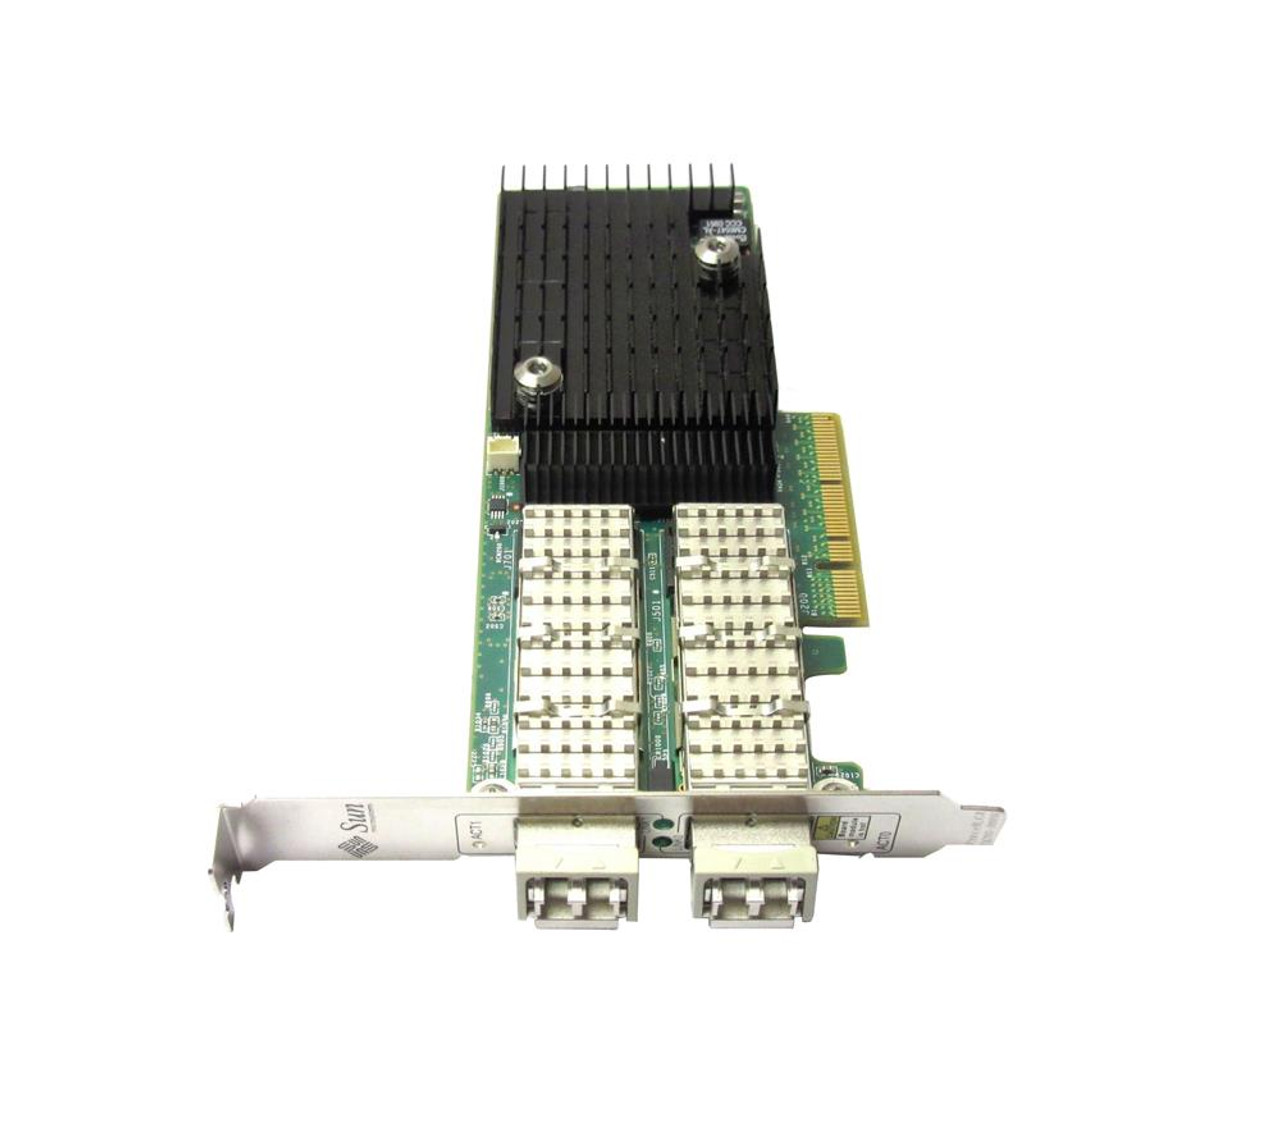 501-7283-09 Sun Multithreaded Dual-Ports 10Gbps Gigabit Ethernet PCI Express Networking Card